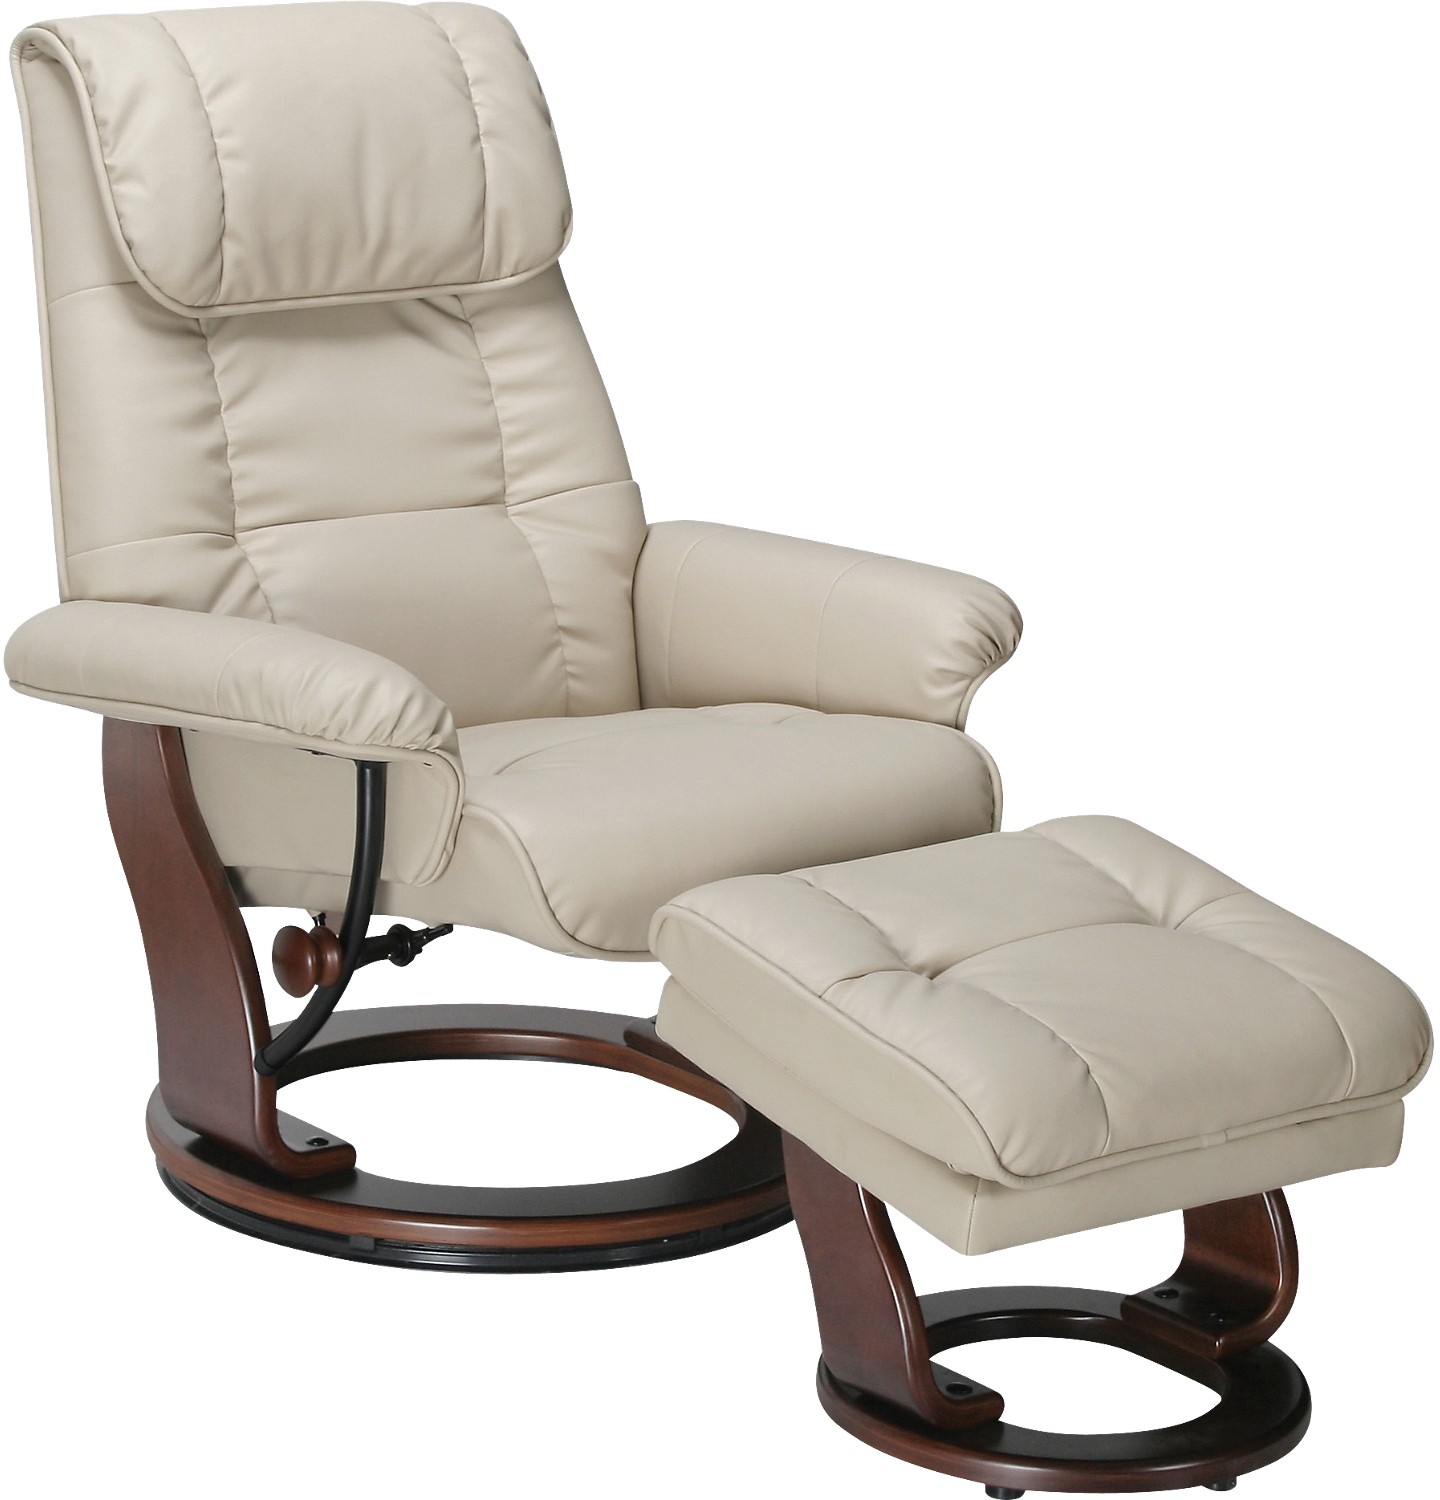 reclining chairs bautiful reclinable chair to complete chairs appeal reclining design  massage recliner chair GXHJCKO